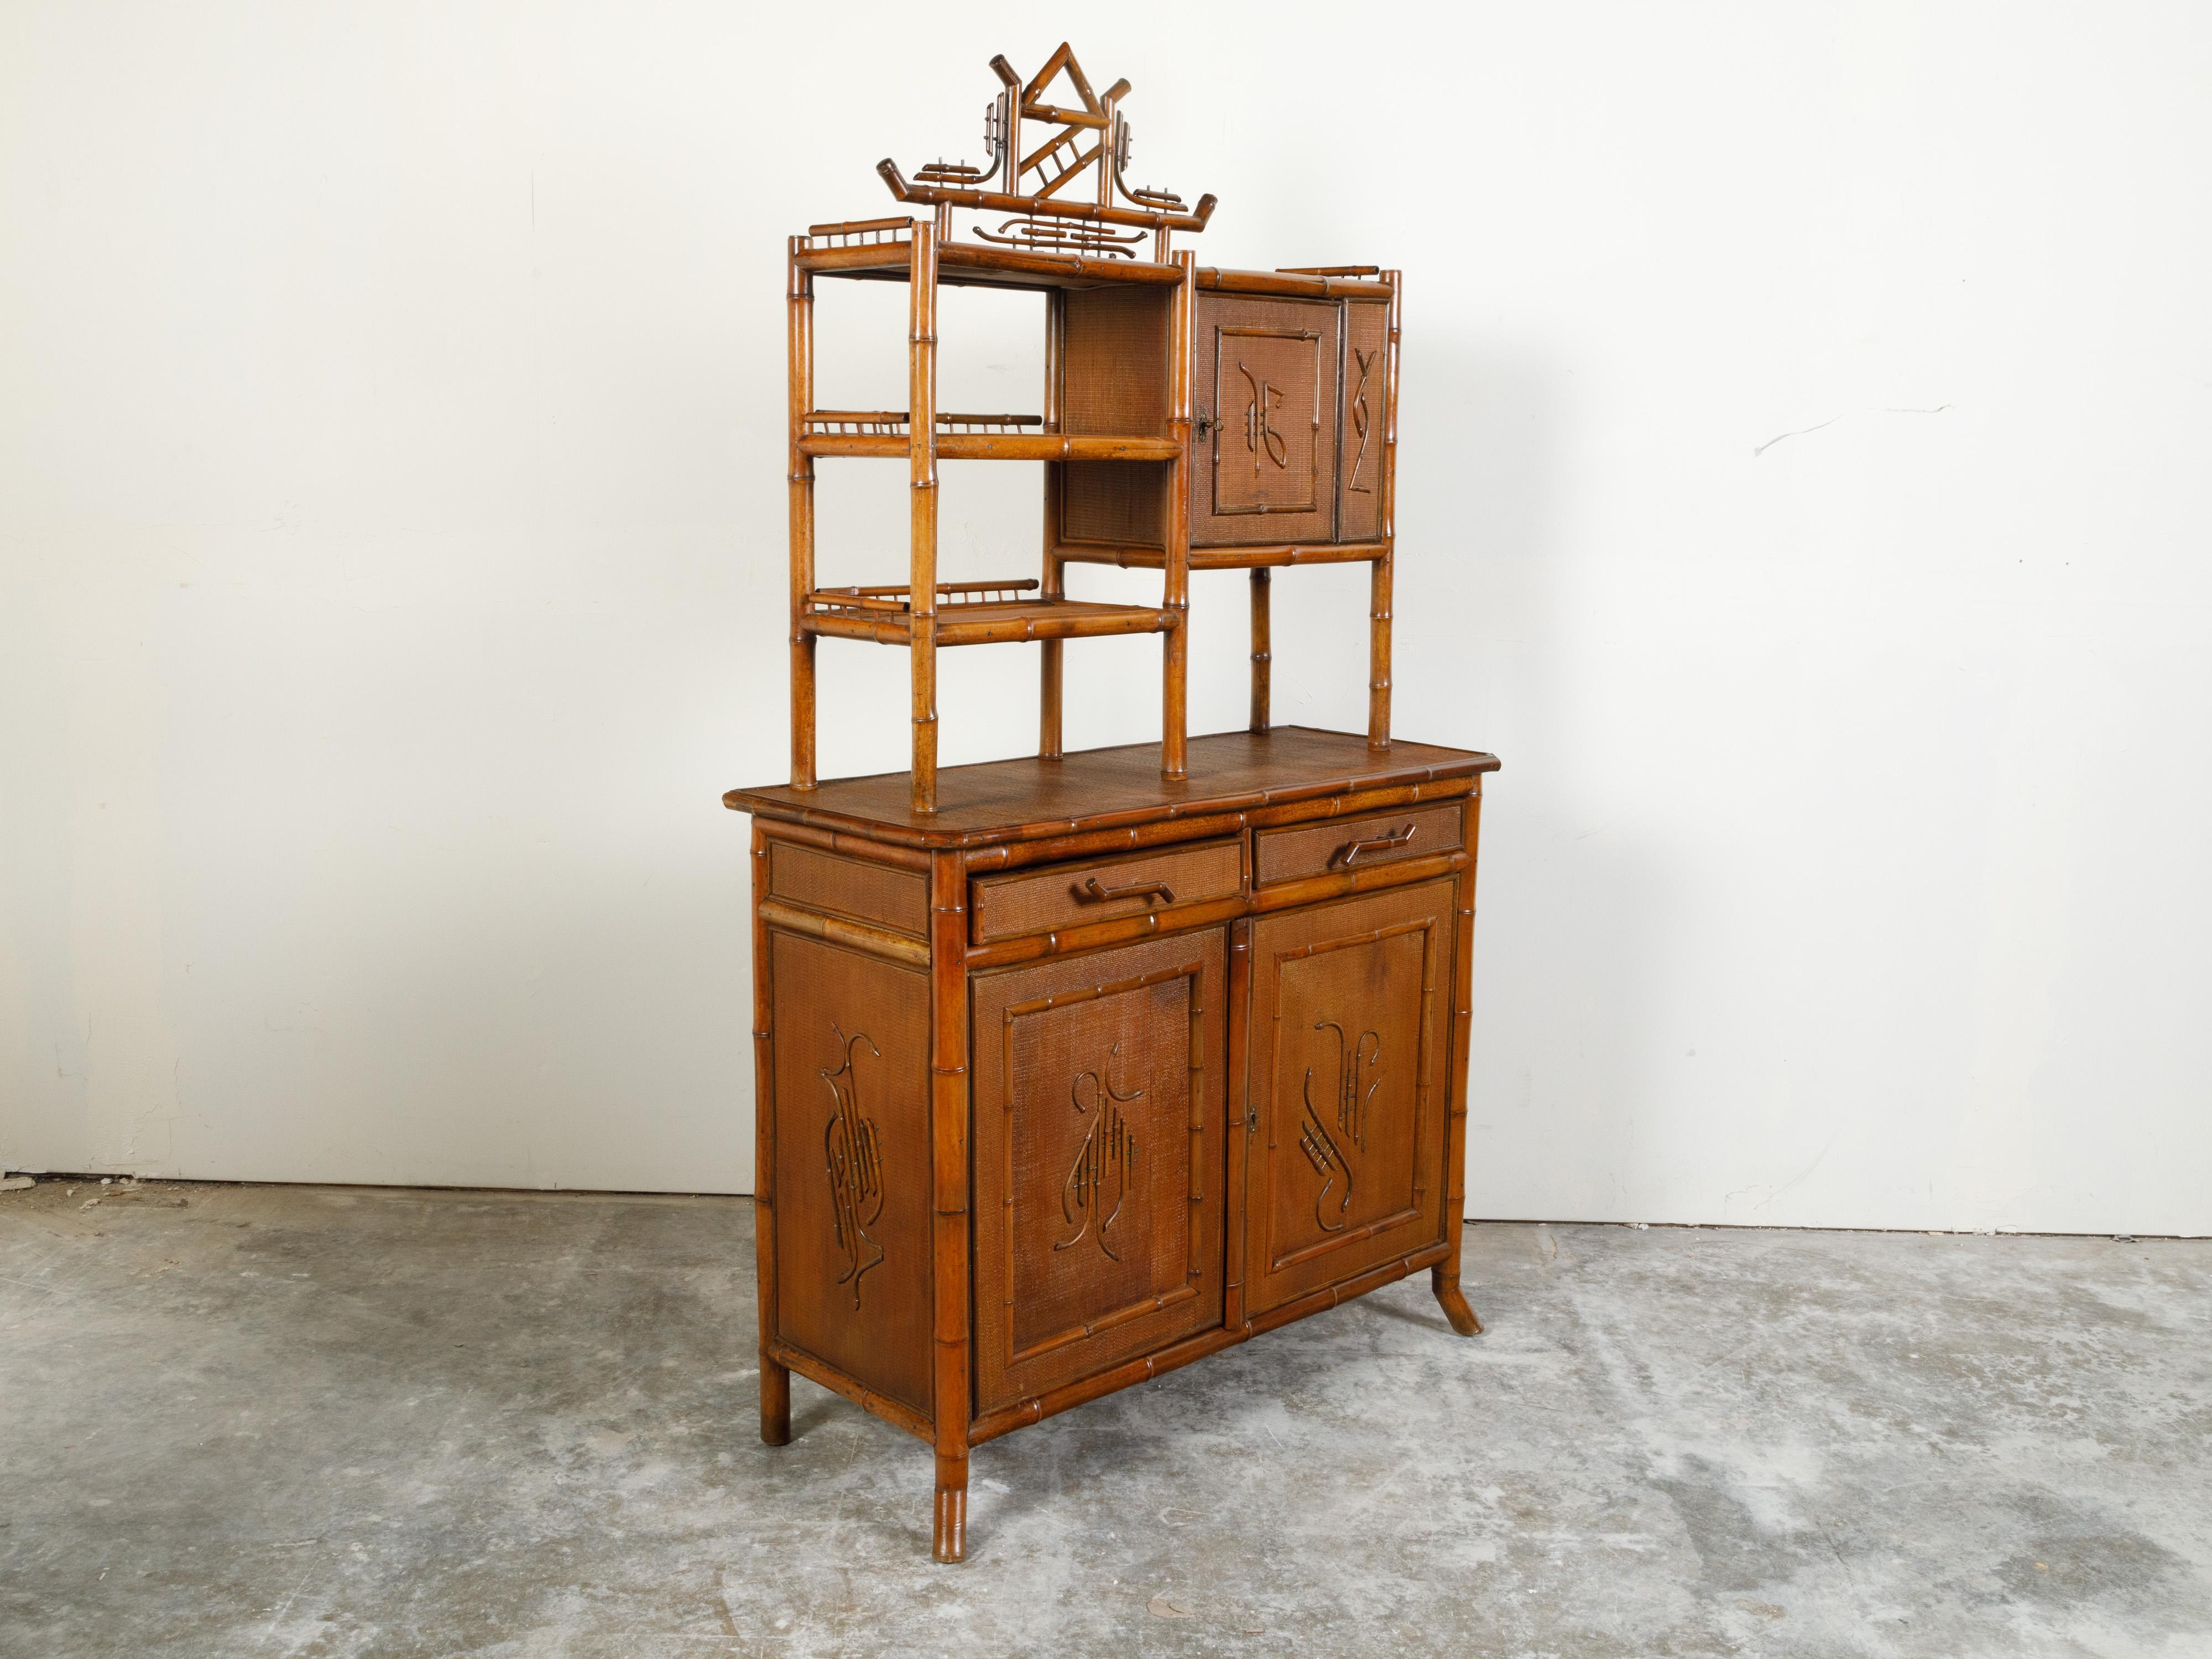 20th Century English 1900s Bamboo Chinoiserie Cabinet with Open Shelves, Drawers and Doors For Sale